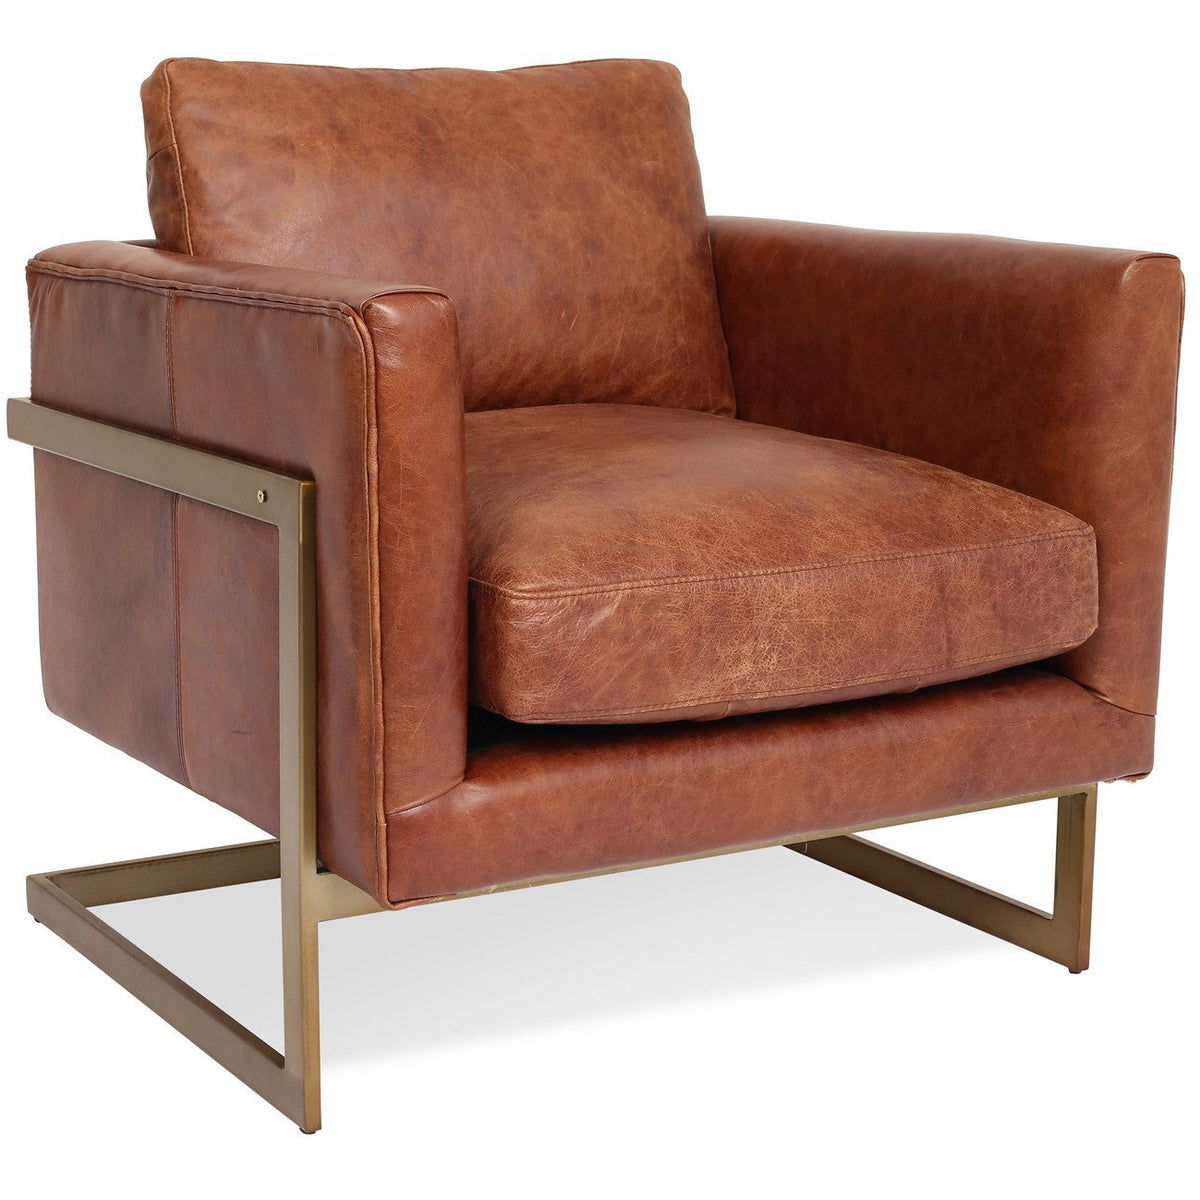 Edloe Finch London Leather Accent Chair